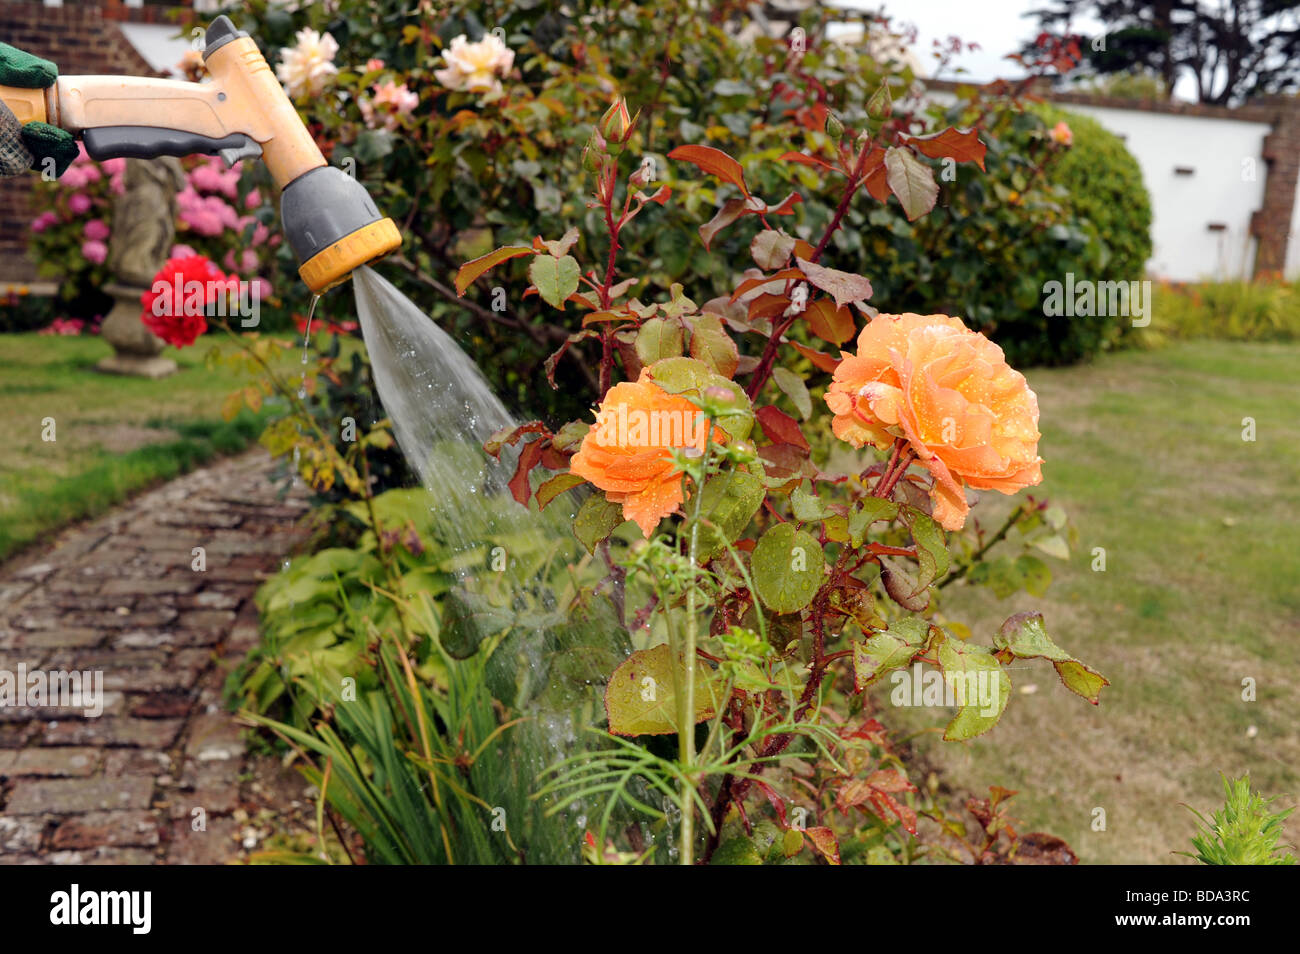 Watering roses in a garden with a hose Stock Photo